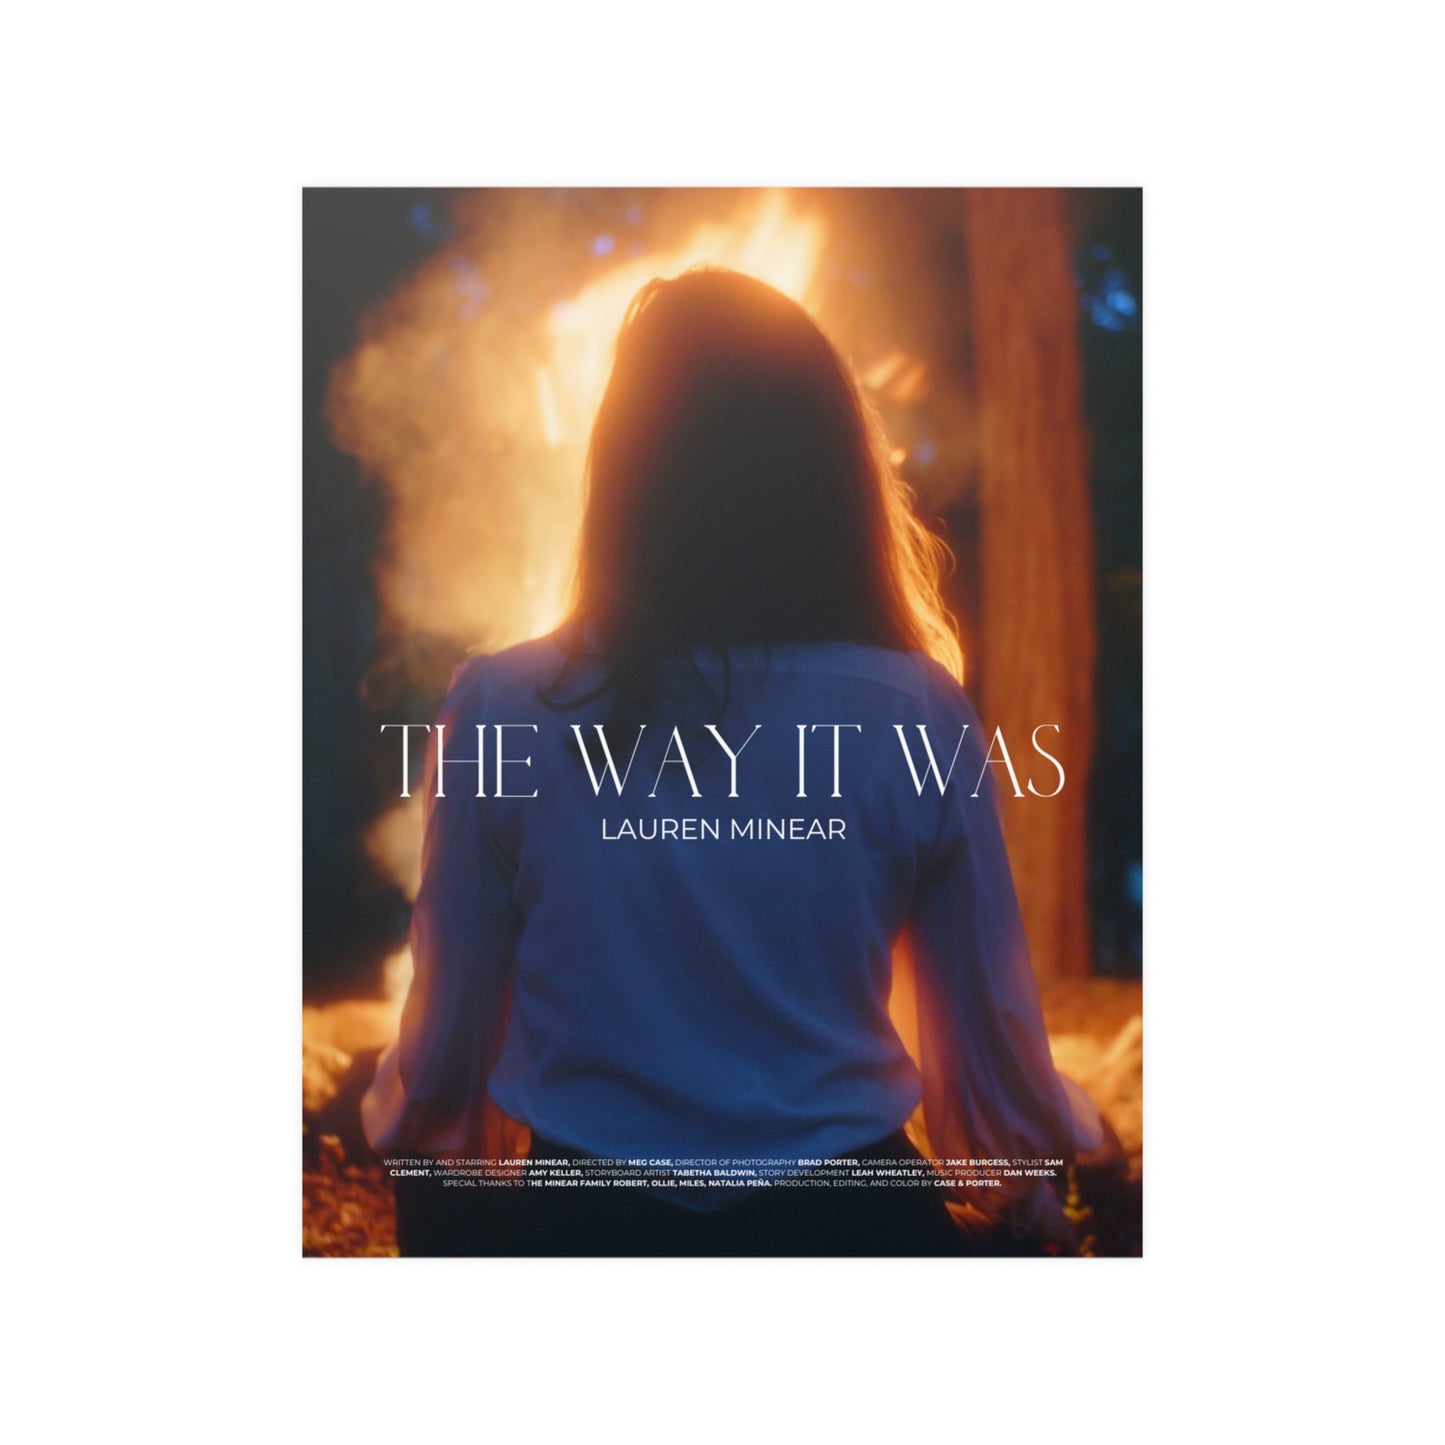 The Way It Was Release Poster